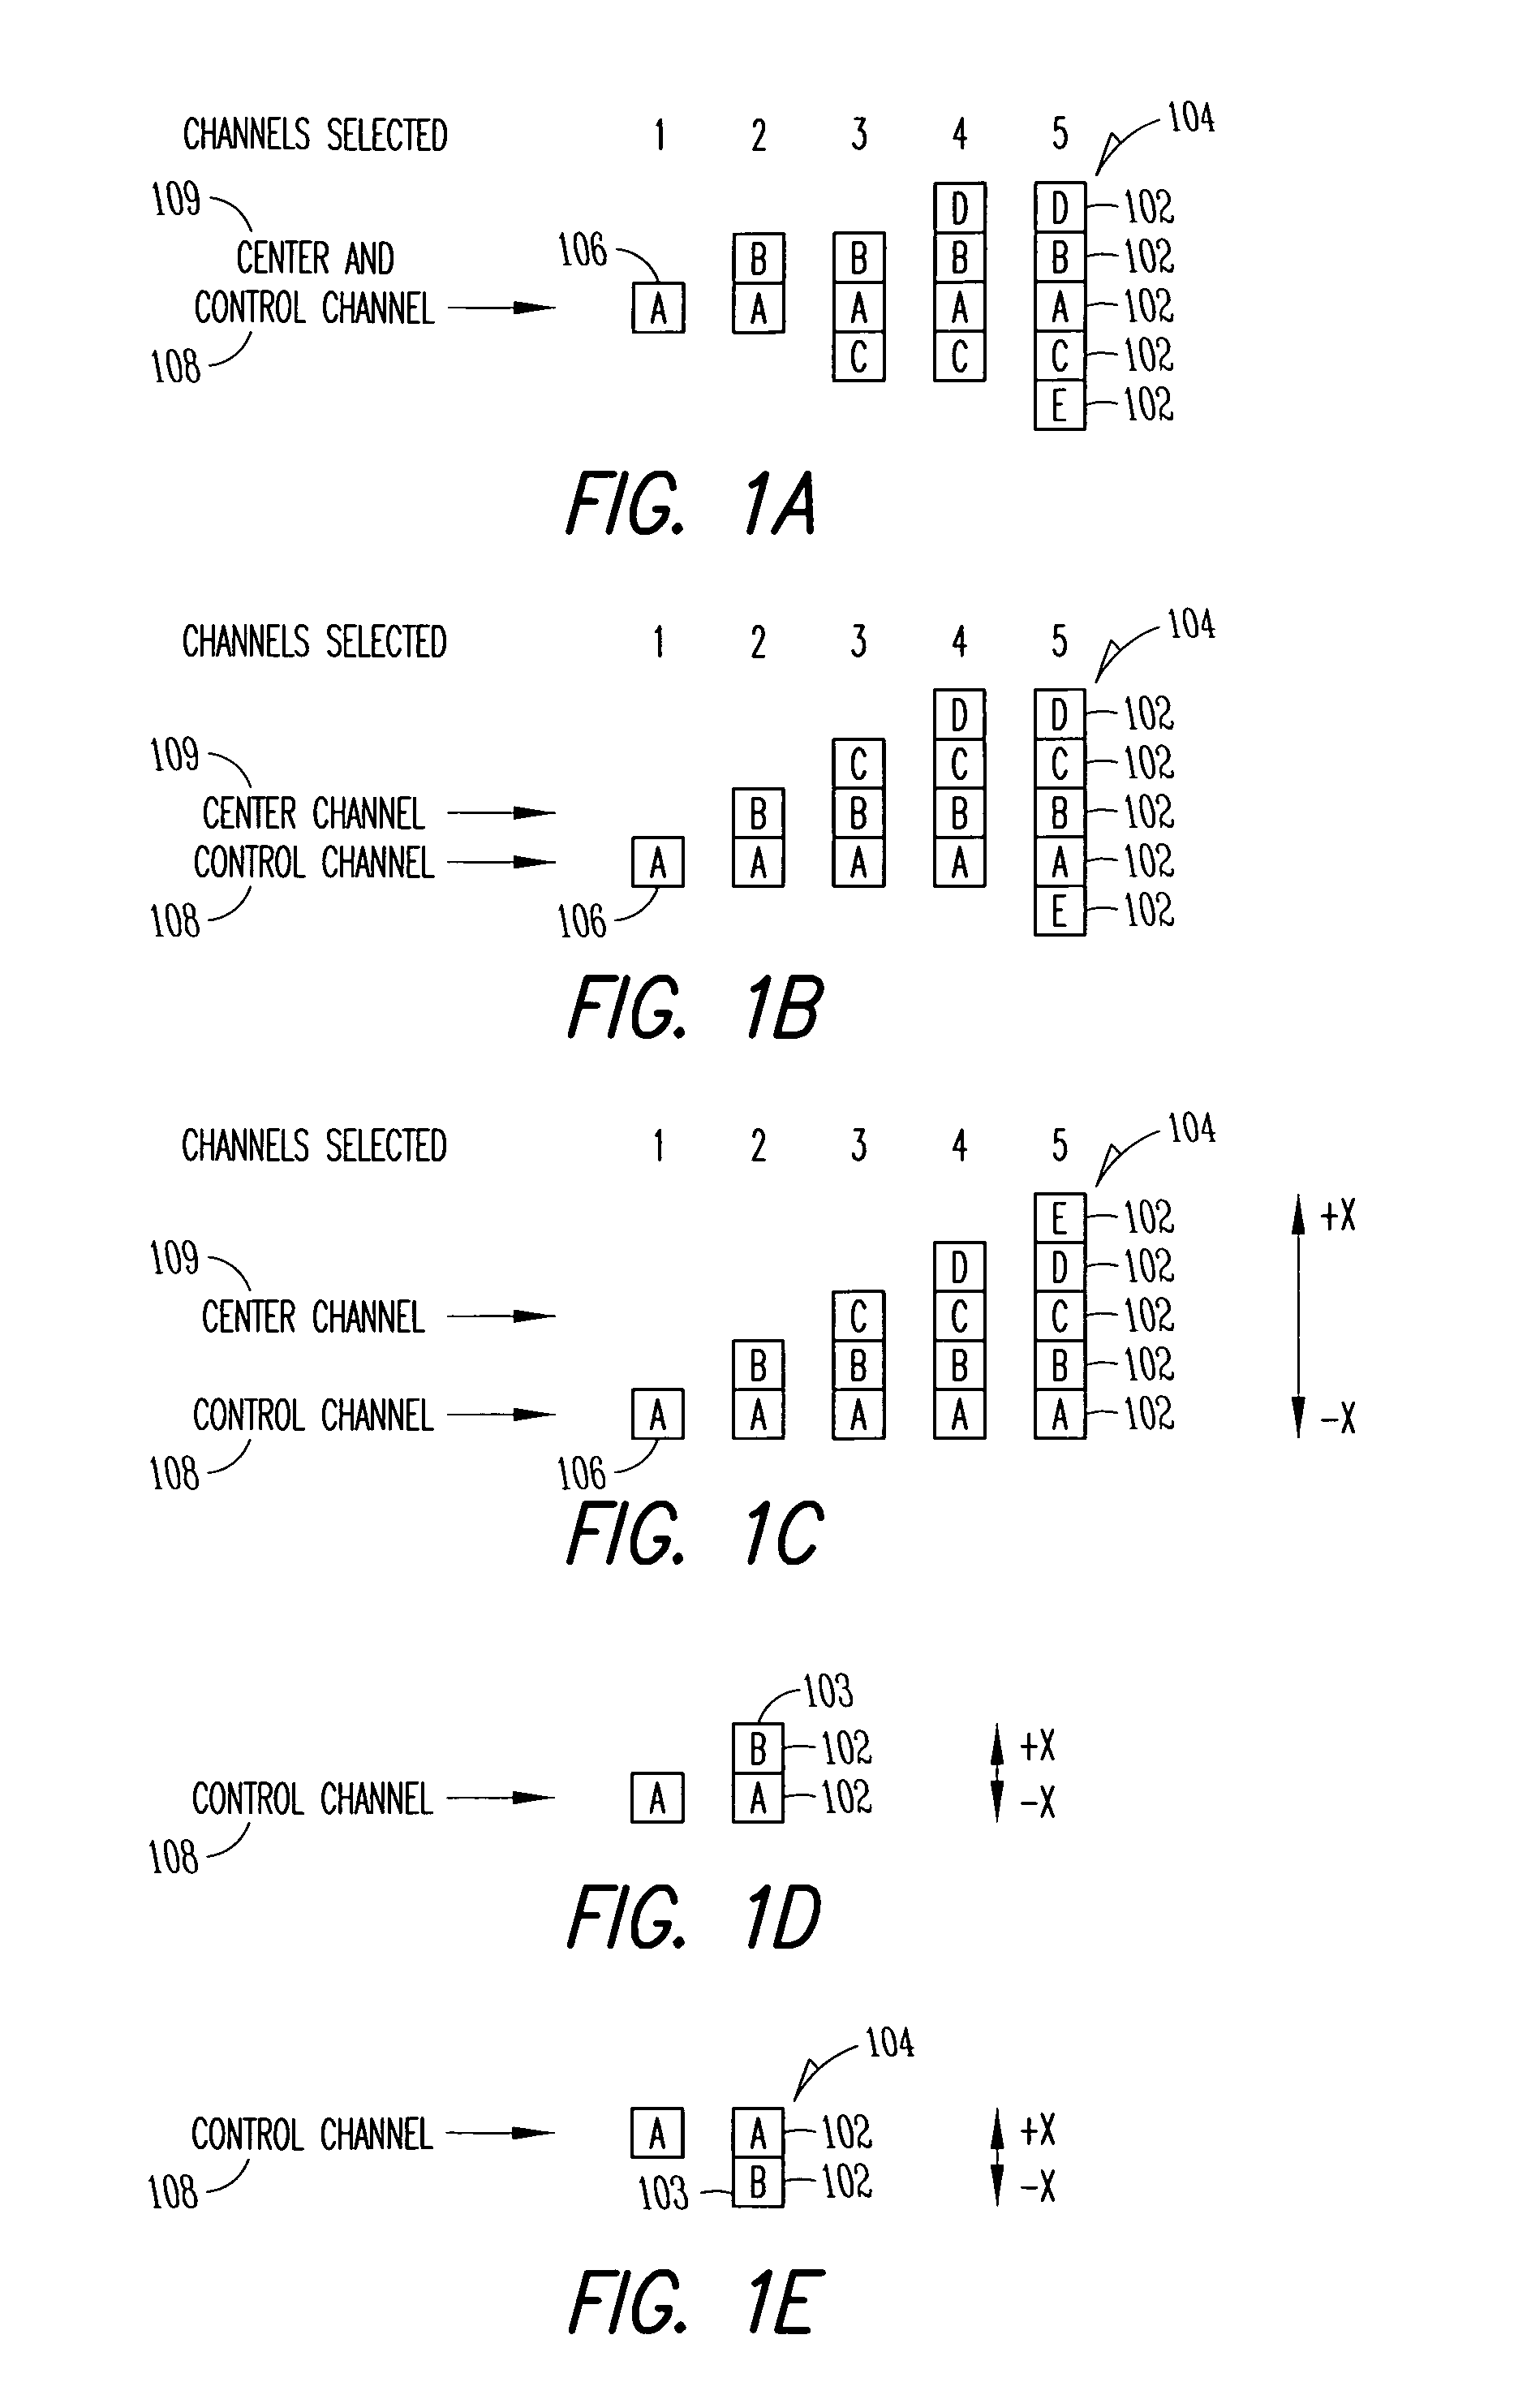 Channel specification apparatus, systems, and methods